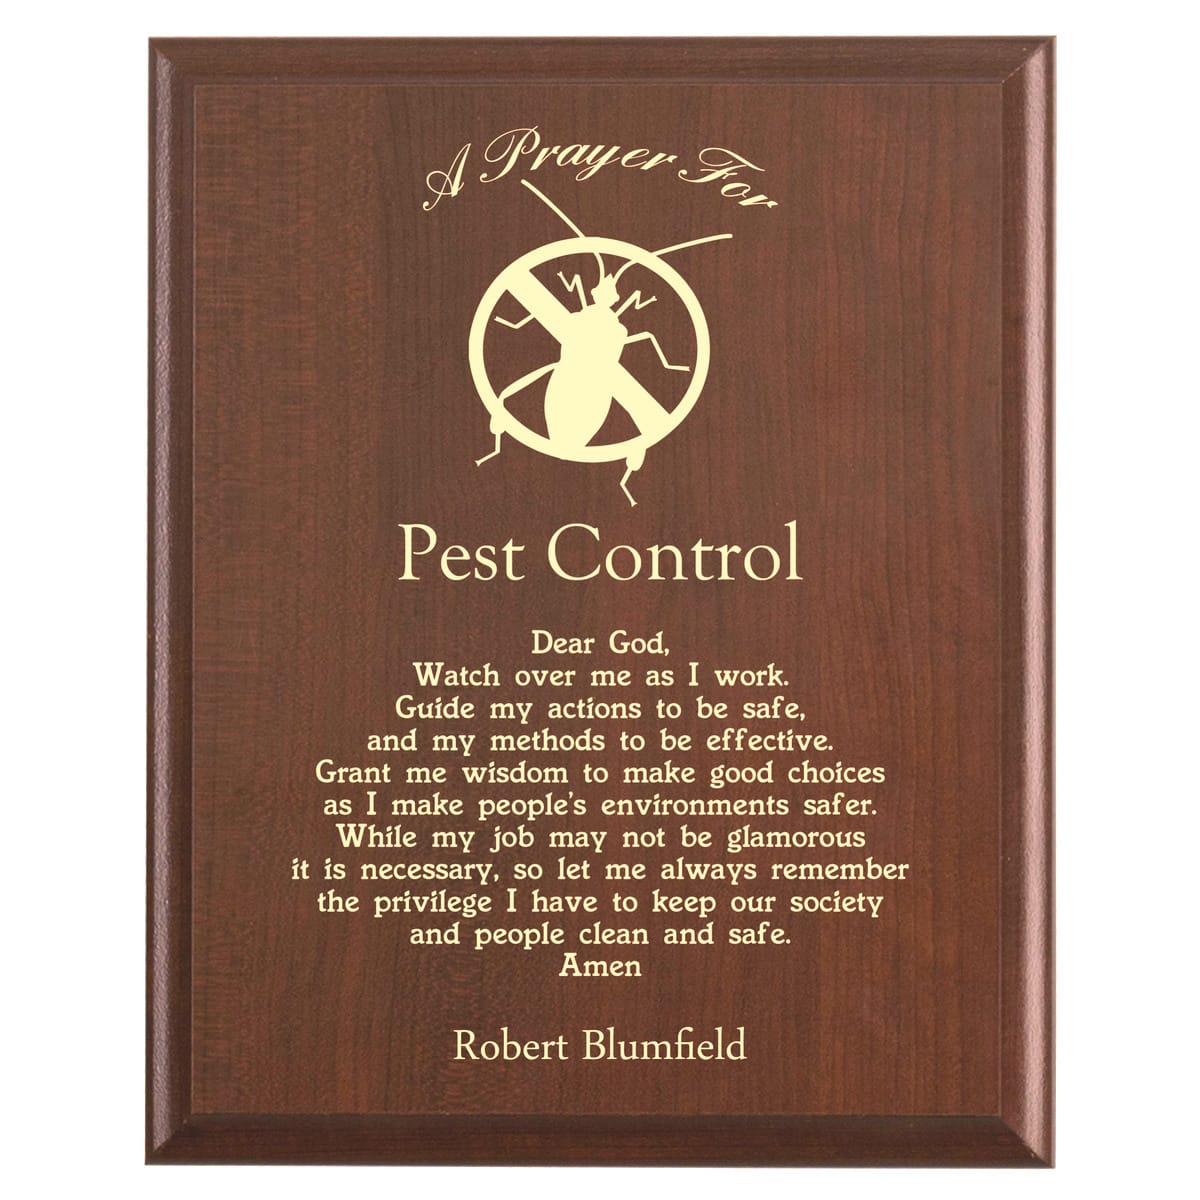 Plaque photo: Exterminator Prayer Plaque design with free personalization. Wood style finish with customized text.